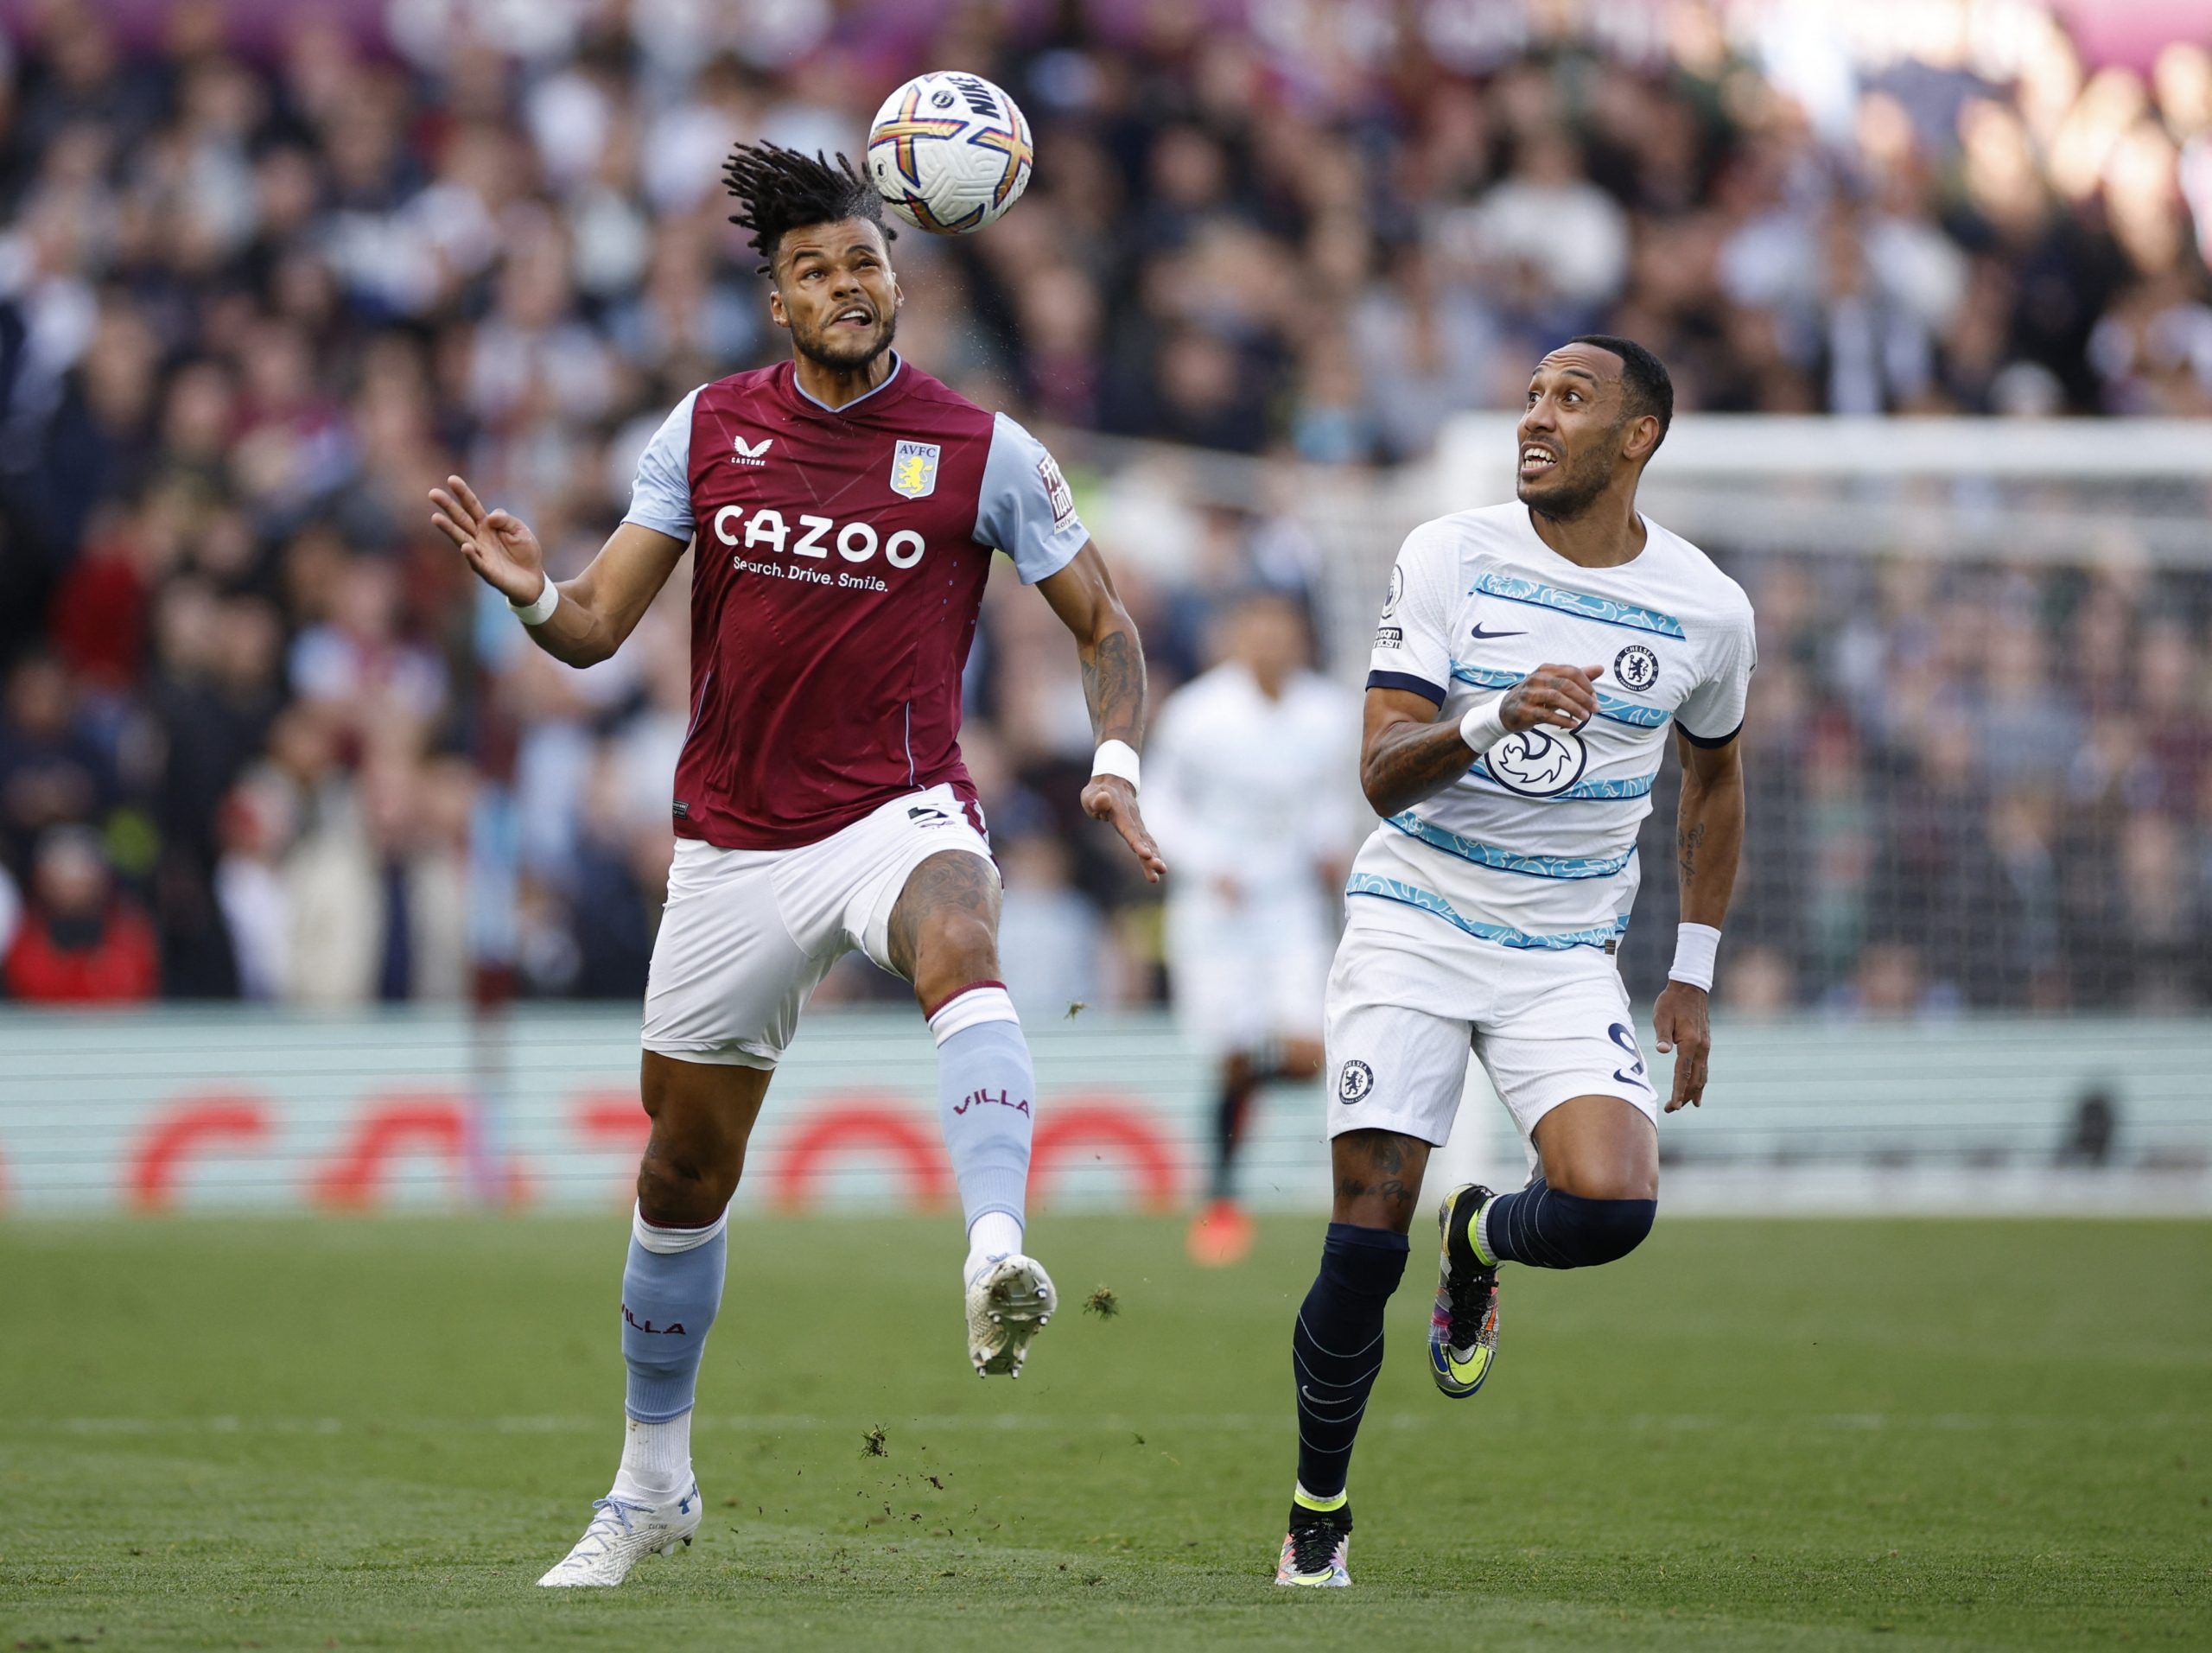 Soccer Football - Premier League - Aston Villa v Chelsea - Villa Park, Birmingham, Britain - October 16, 2022  Aston Villa's Tyrone Mings in action with Chelsea's Pierre-Emerick Aubameyang Action Images via Reuters/John Sibley EDITORIAL USE ONLY. No use with unauthorized audio, video, data, fixture lists, club/league logos or 'live' services. Online in-match use limited to 75 images, no video emulation. No use in betting, games or single club /league/player publications.  Please contact your acc